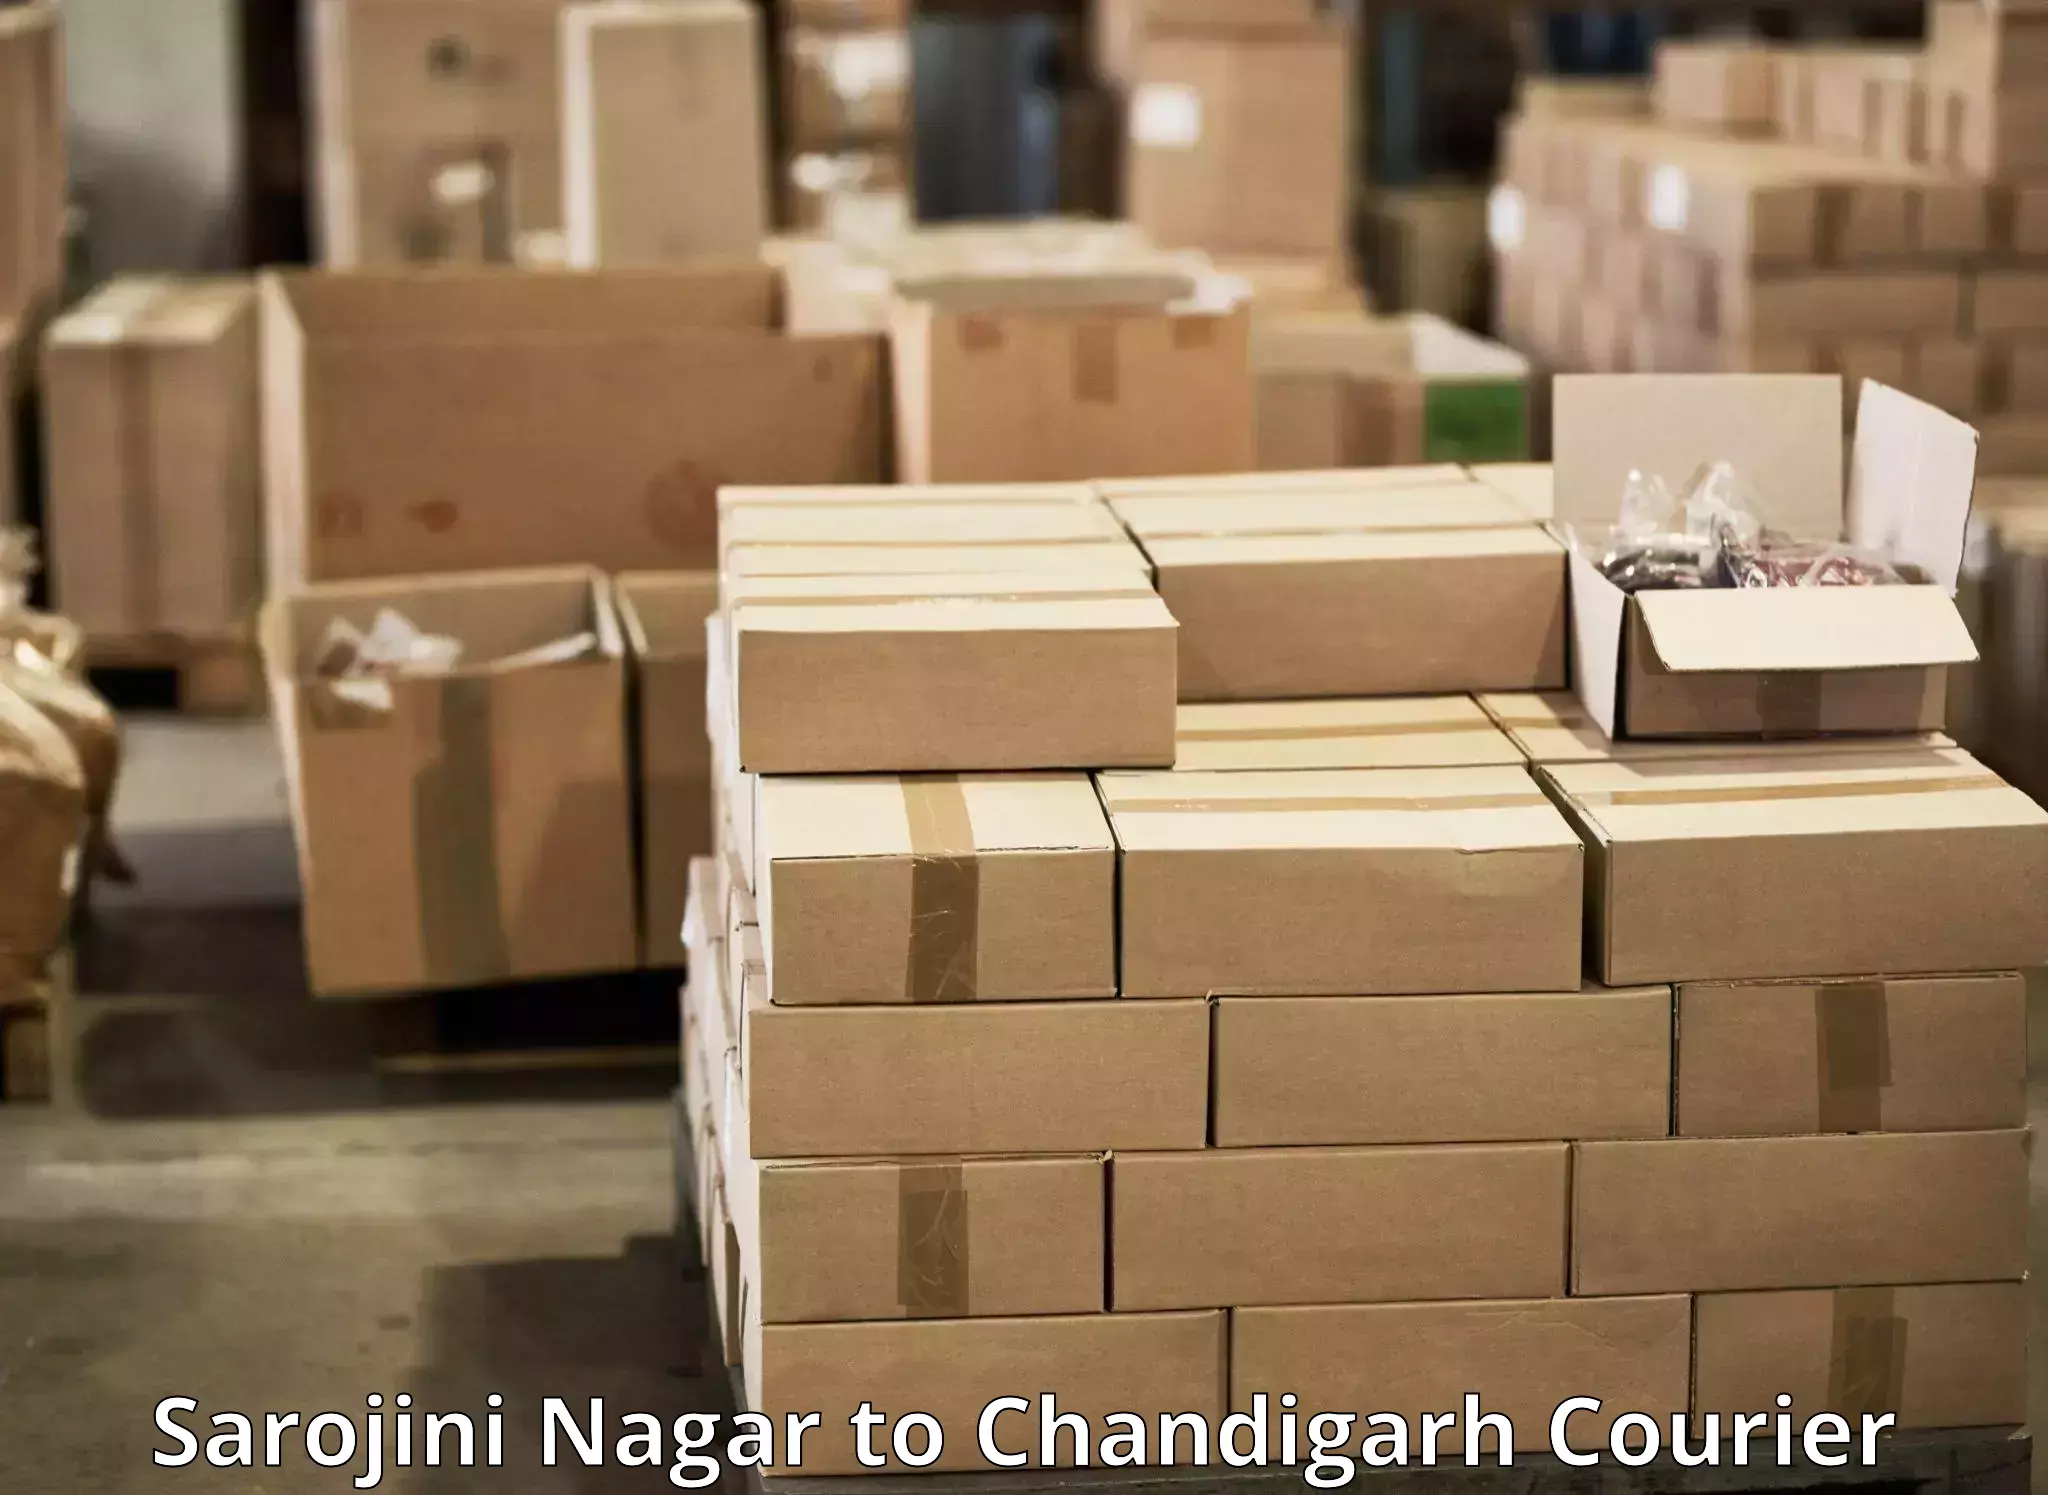 Express delivery solutions Sarojini Nagar to Chandigarh